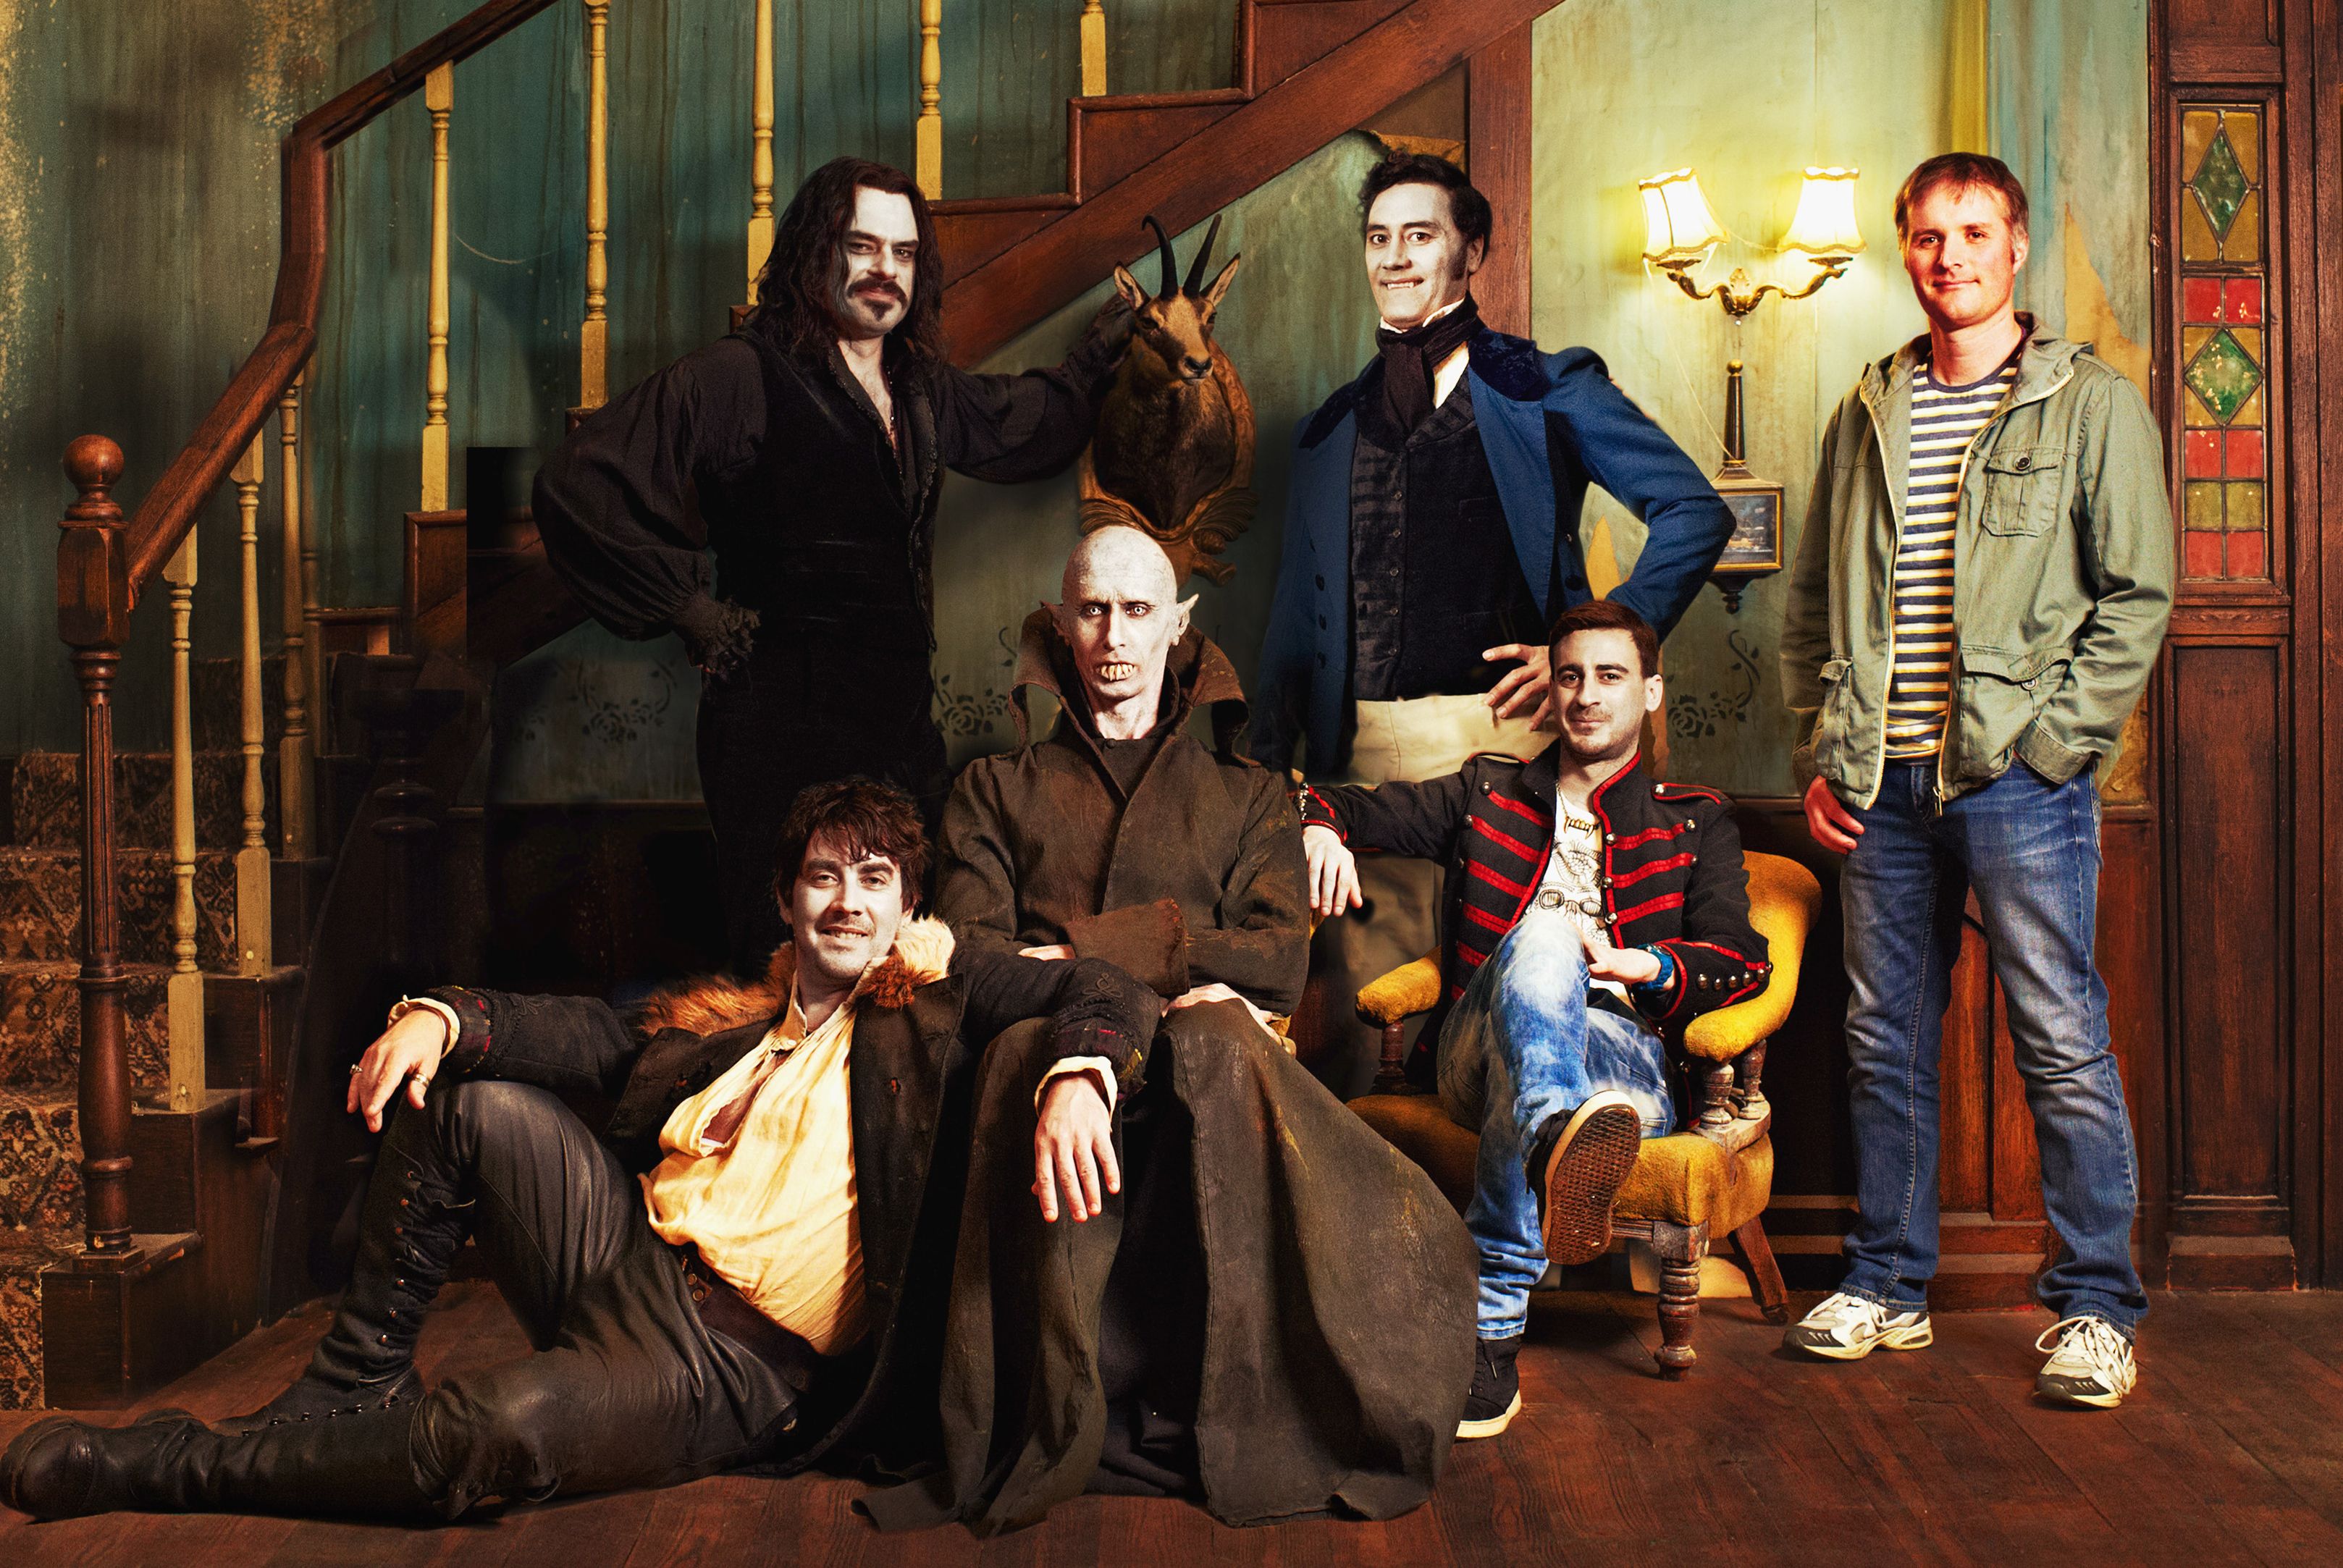 The Cast of 'What We Do in the Shadows'